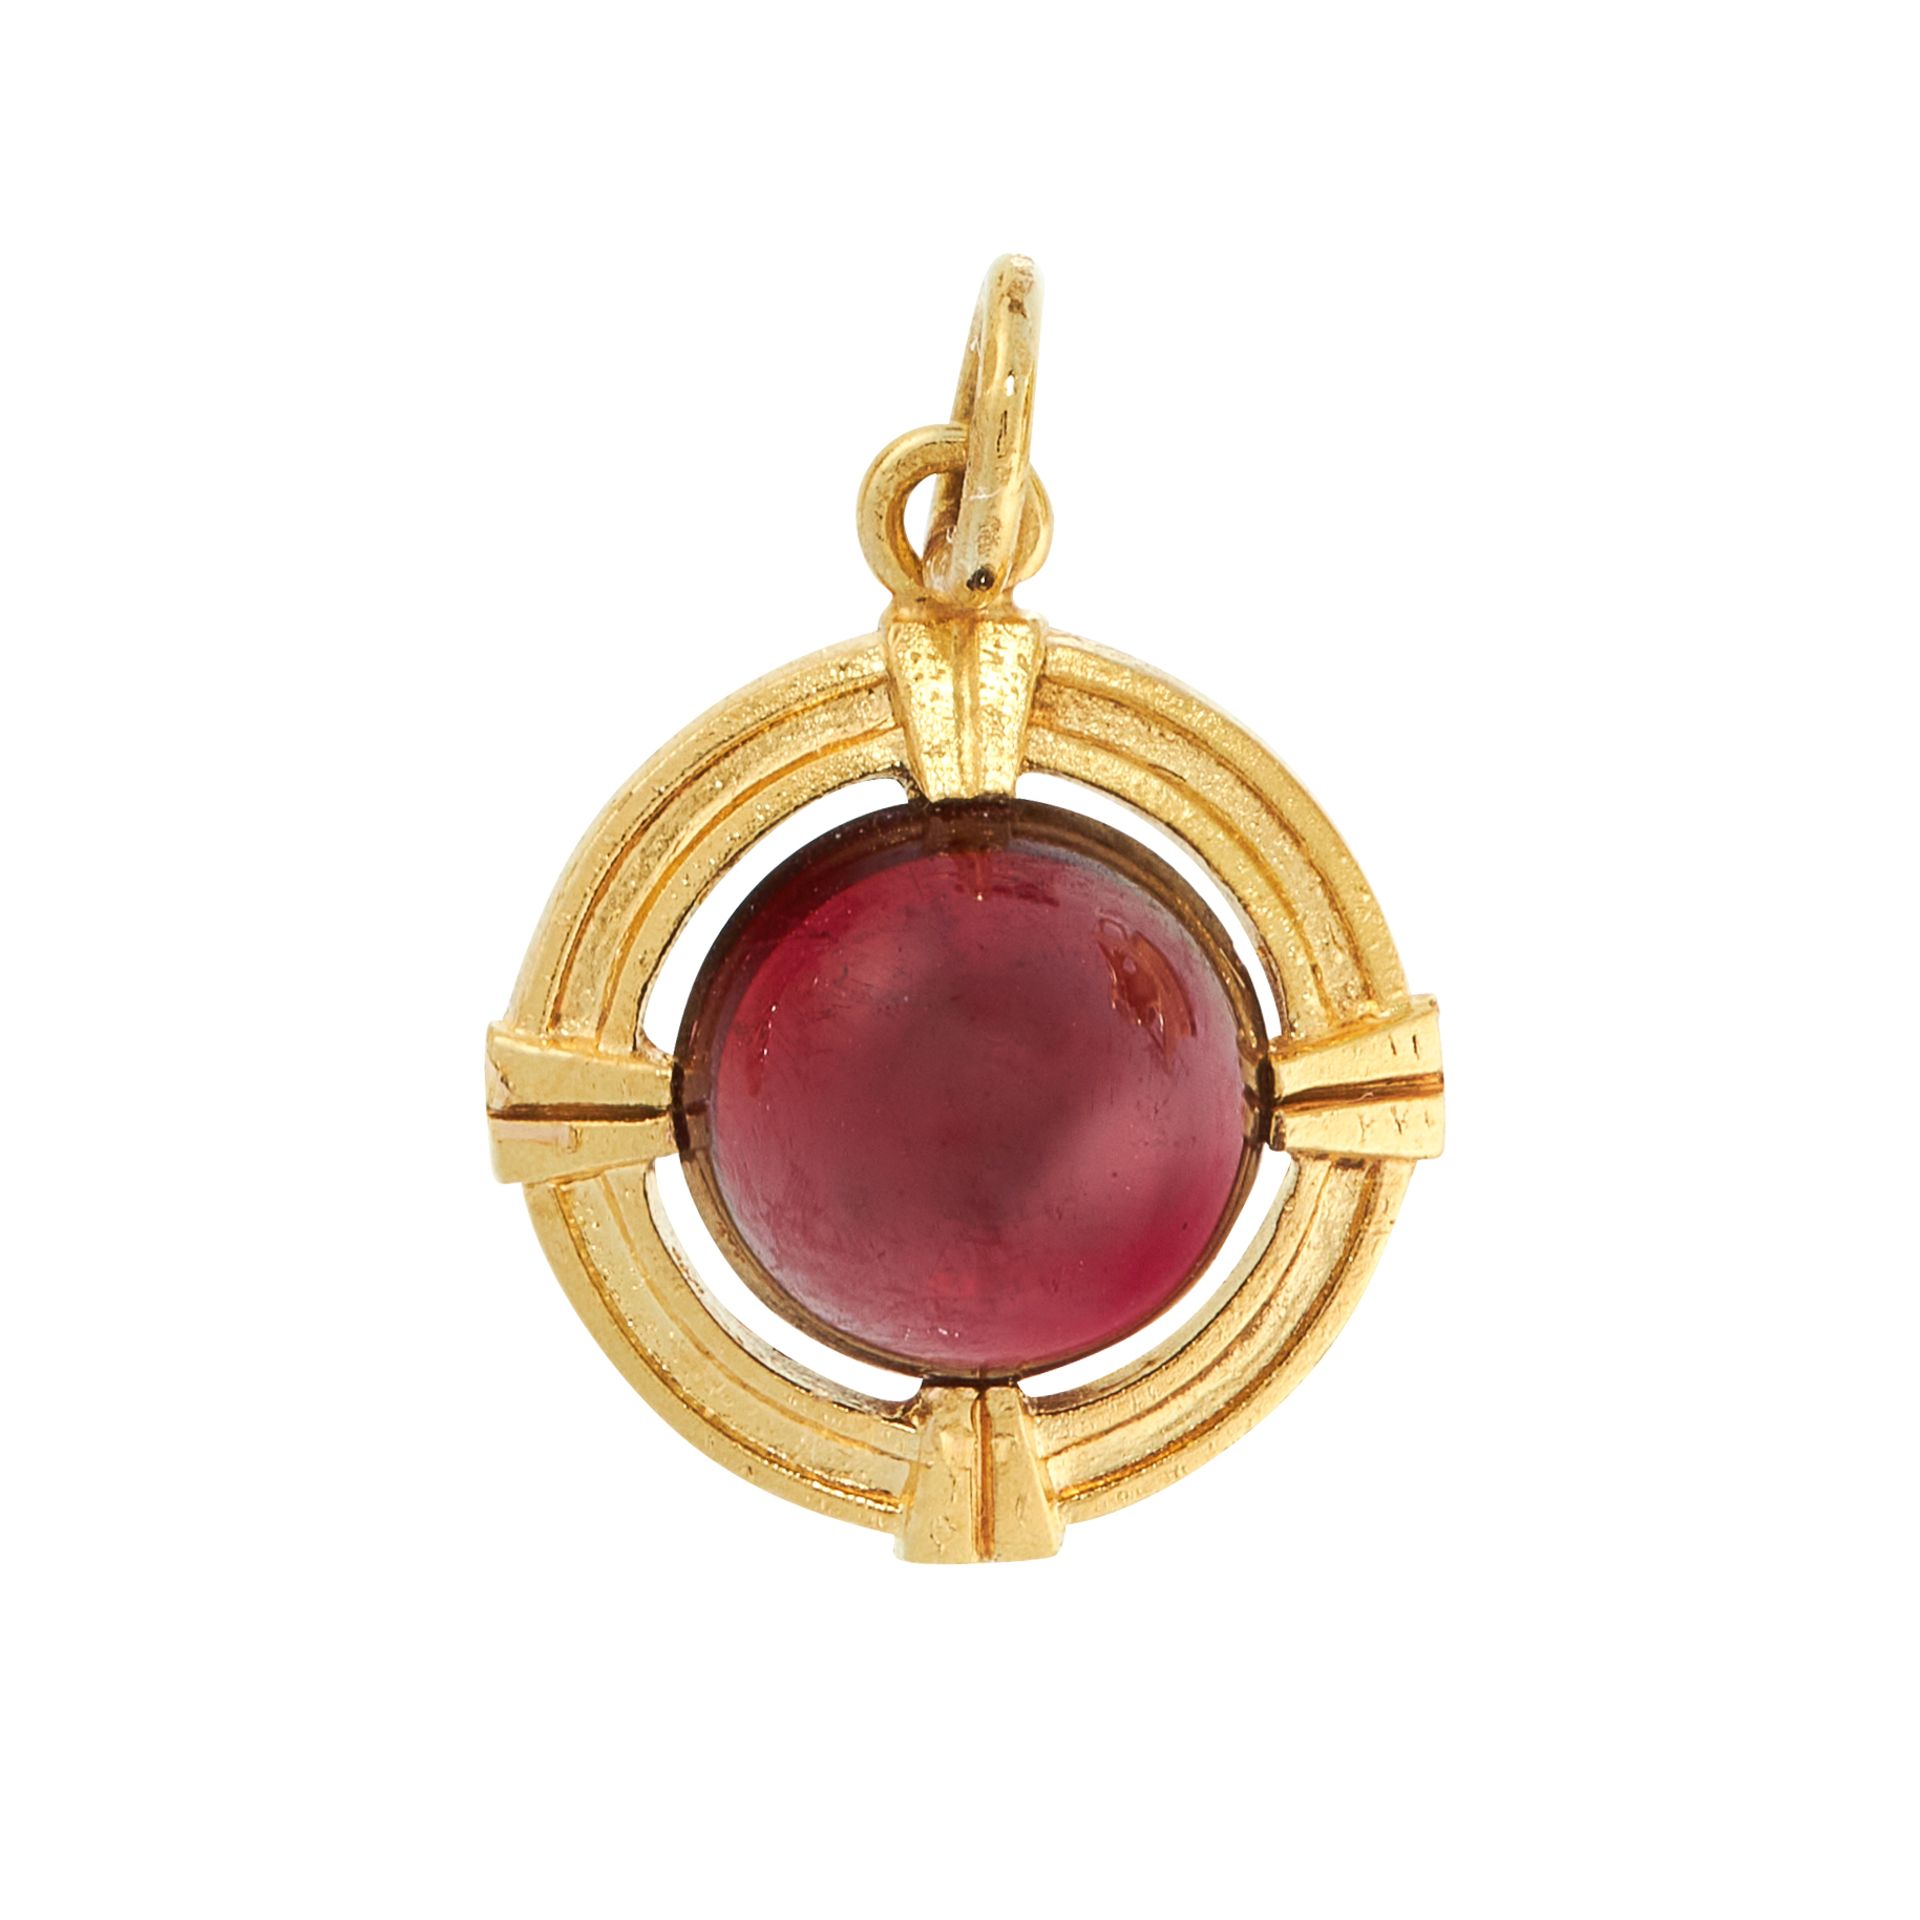 AN ANTIQUE GARNET PENDANT / CHARM in 15ct yellow gold, set with a round cabochon garnet within a